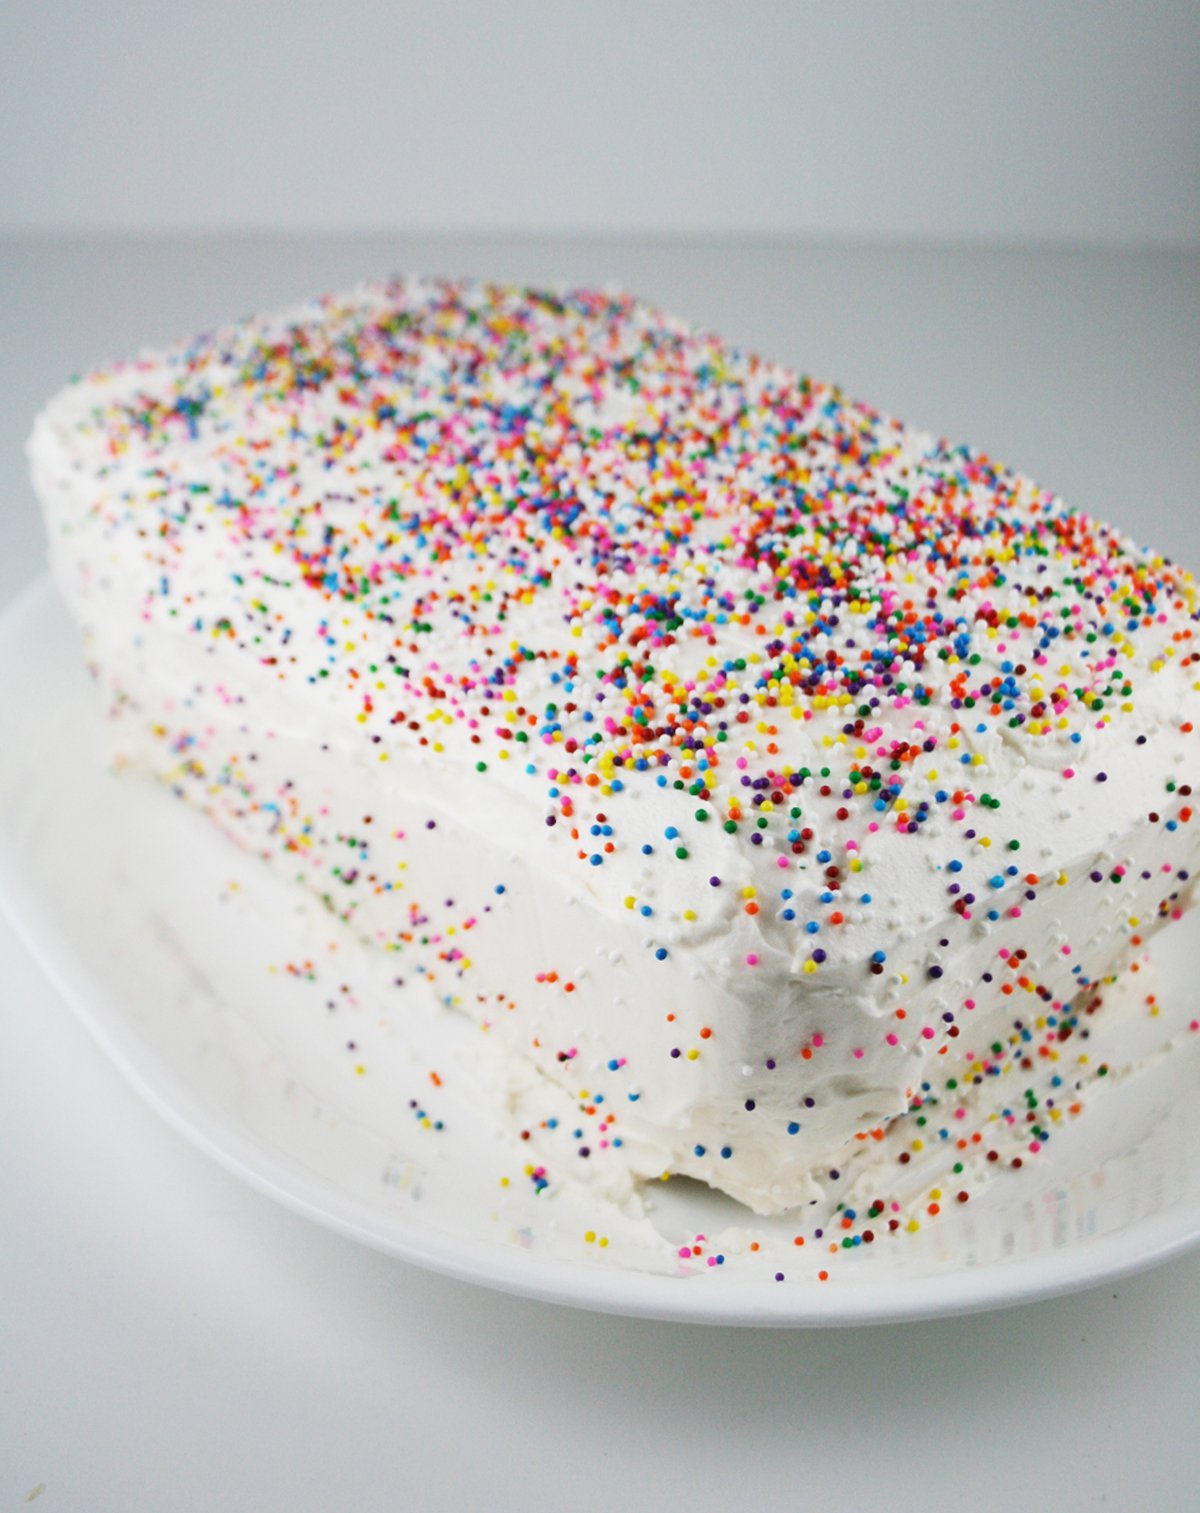 Homemade cake frosted with white buttercream and topped with sprinkles.